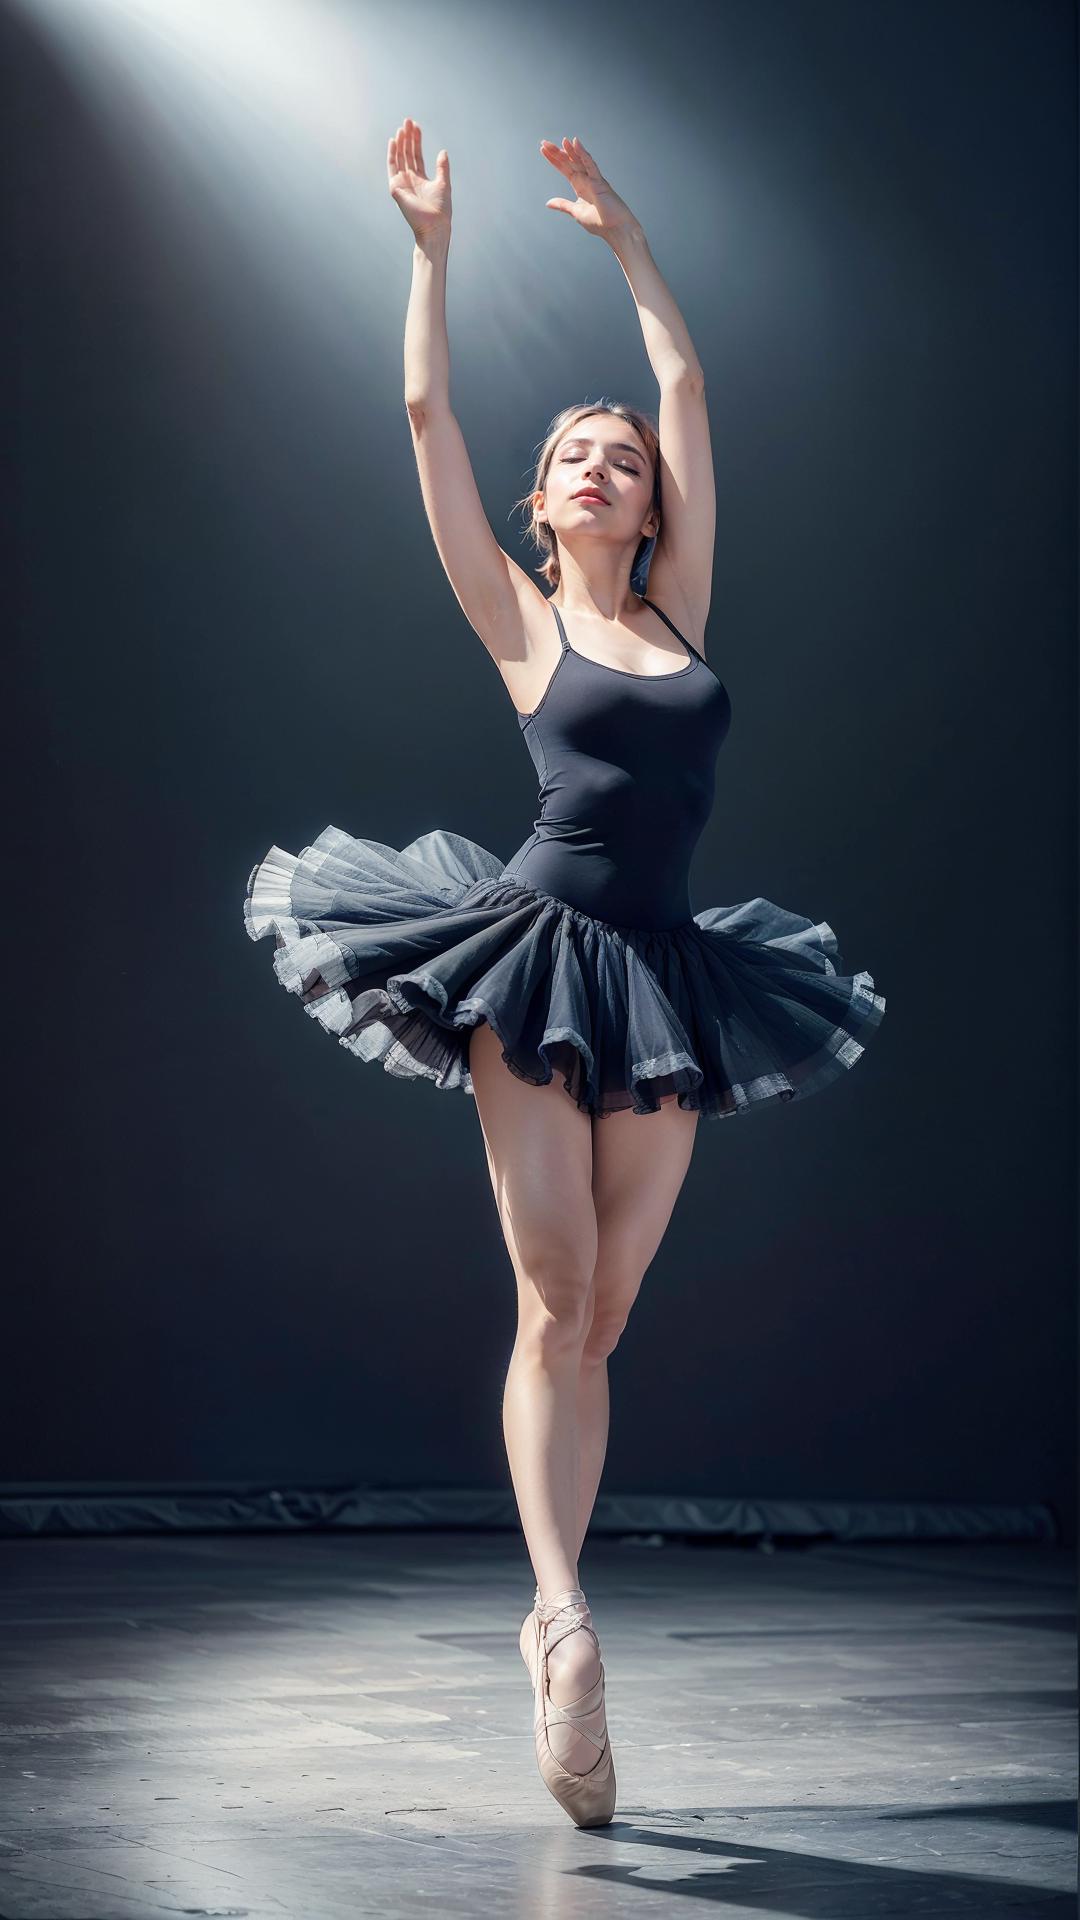 Black and White Ballet Performance: Woman in a Black Leotard and Tutu.